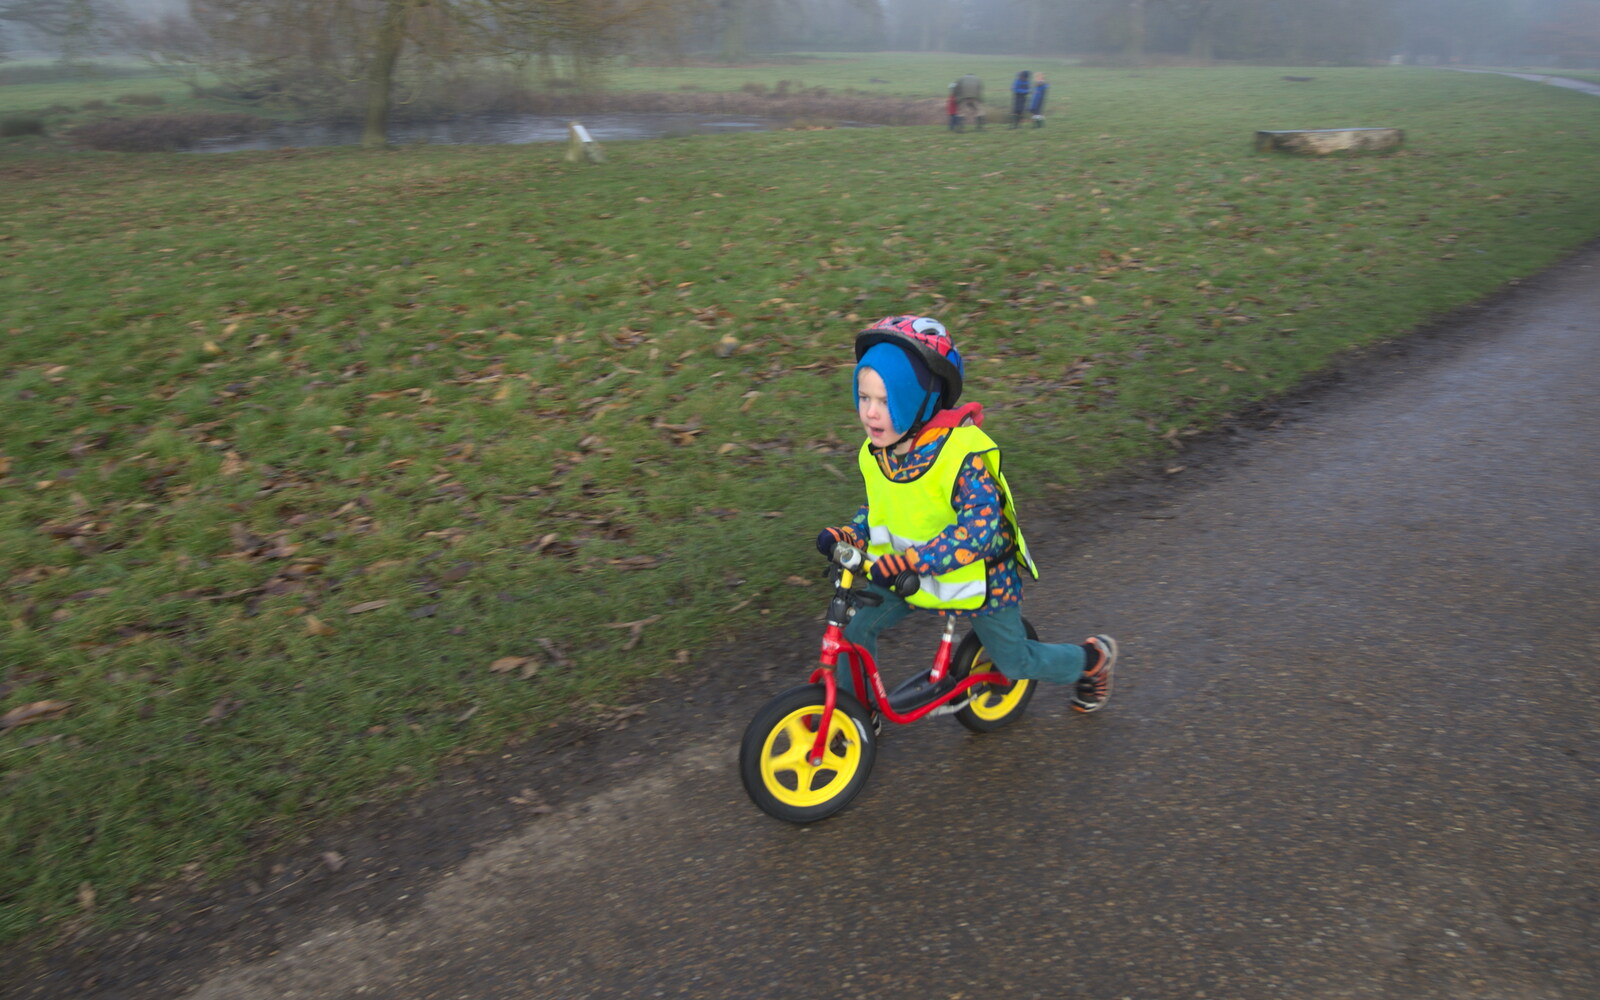 Harry scoots off on his bike from A Trip to Ickworth House, Horringer, Suffolk - 30th December 2016